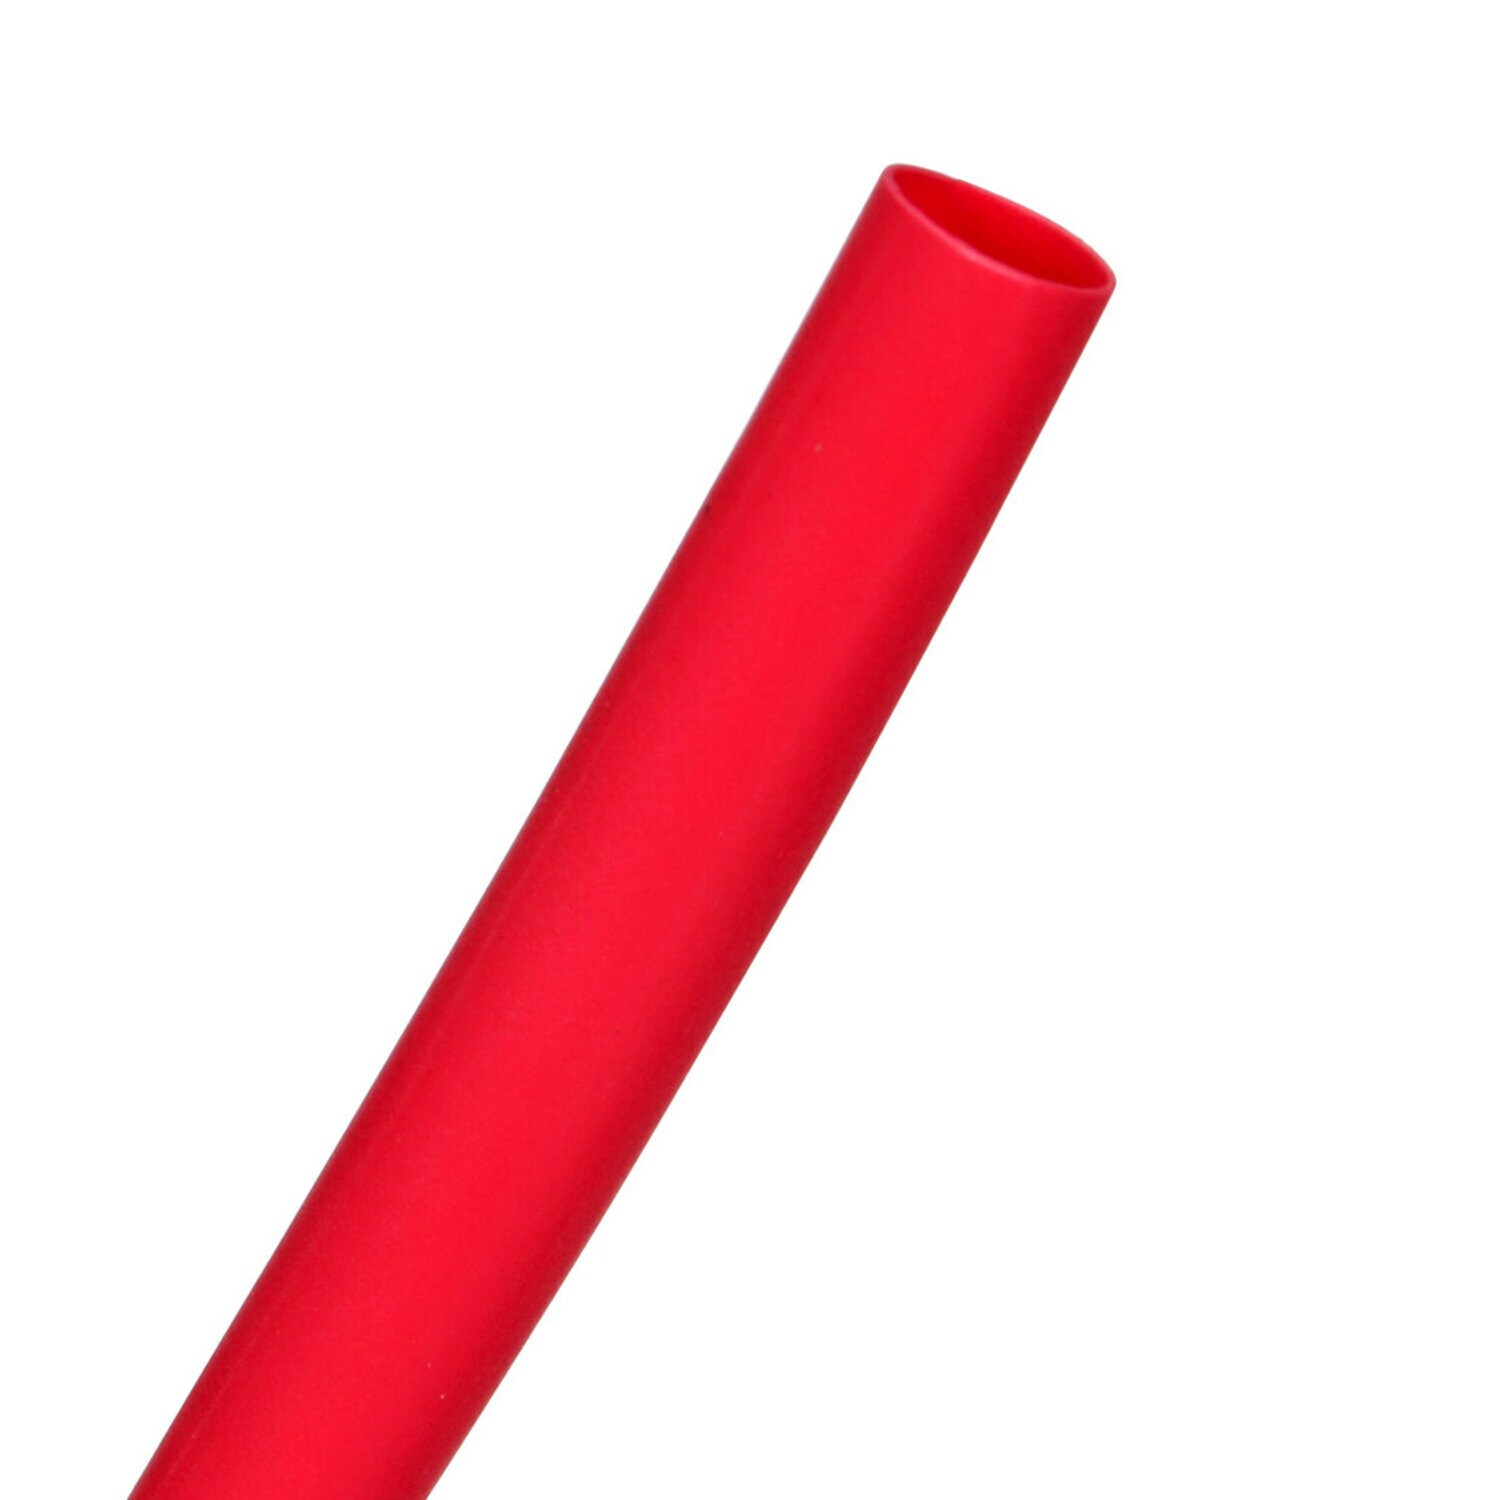 7010400811 - 3M Heat Shrink Thin-Wall Tubing FP-301-1/8-48"-Red-250 Pcs, 48 in
Length sticks, 250 pieces/case